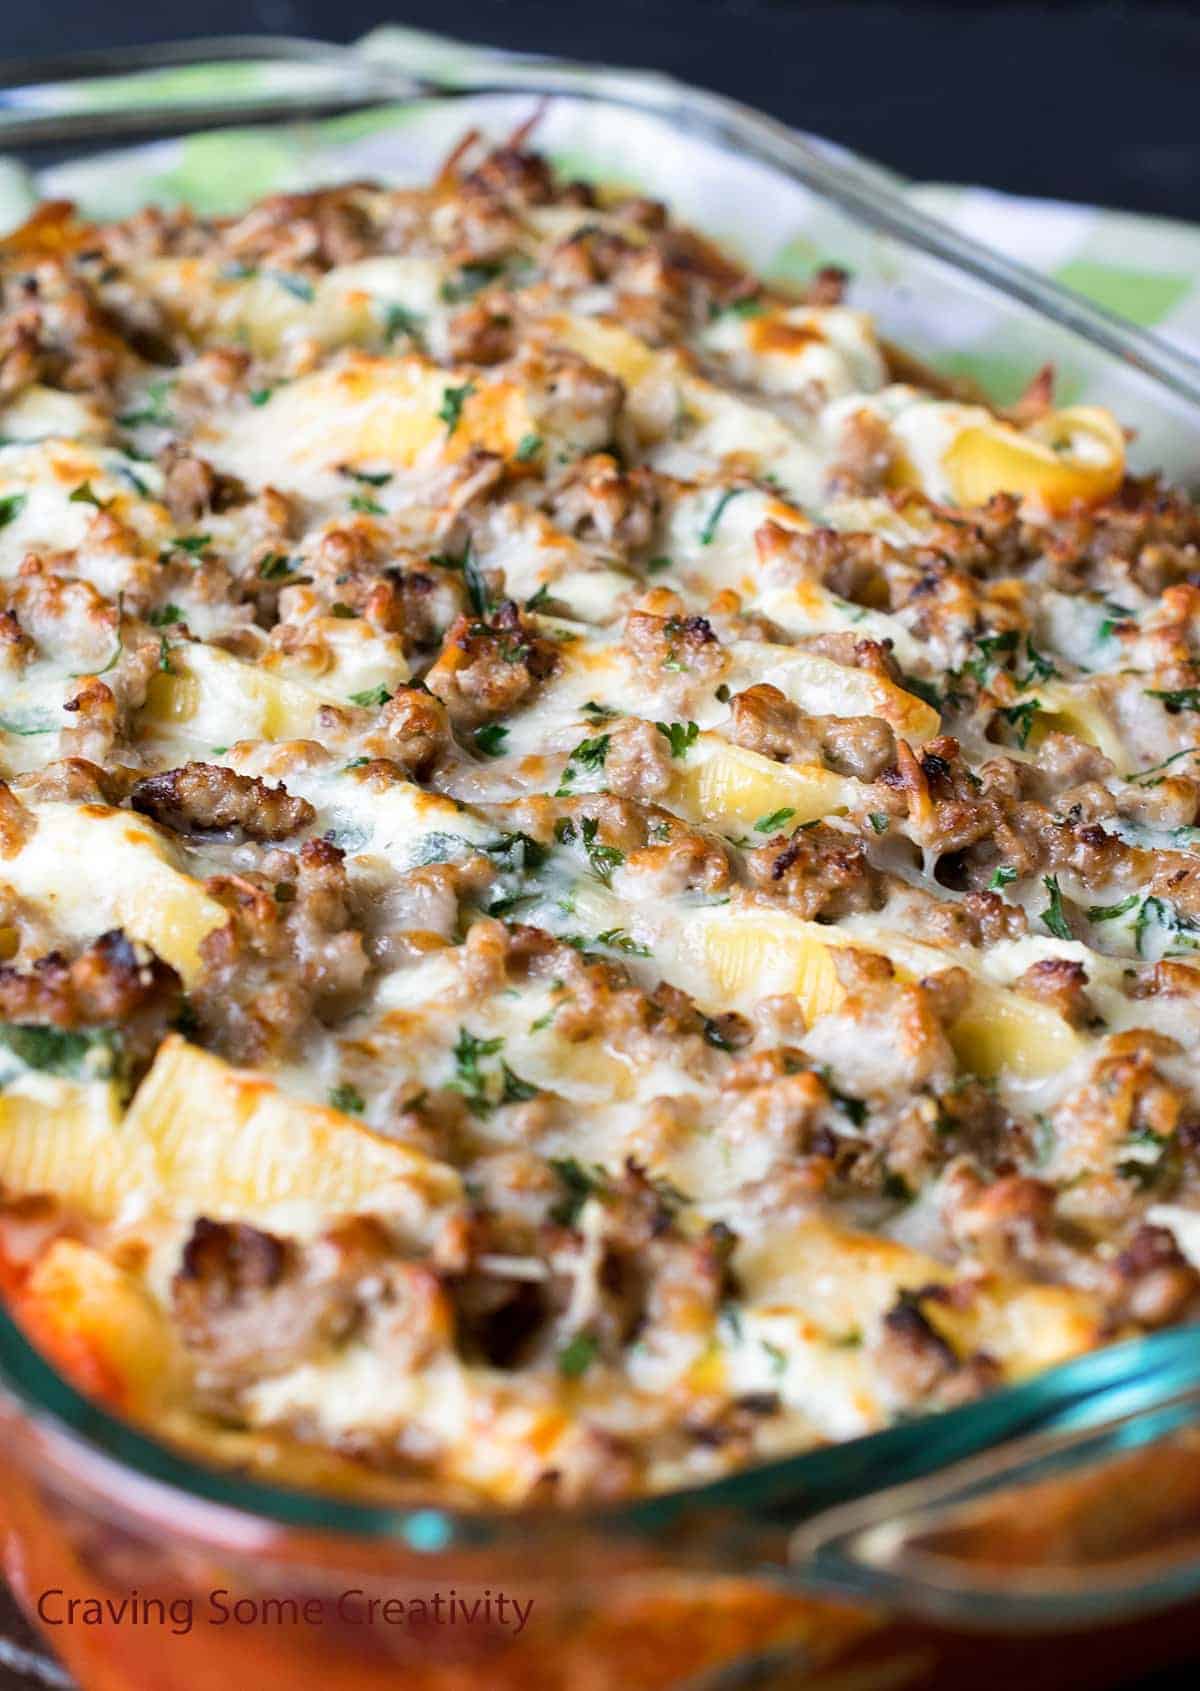 A delicious casserole dish bursting with savory sausage and melted cheese.